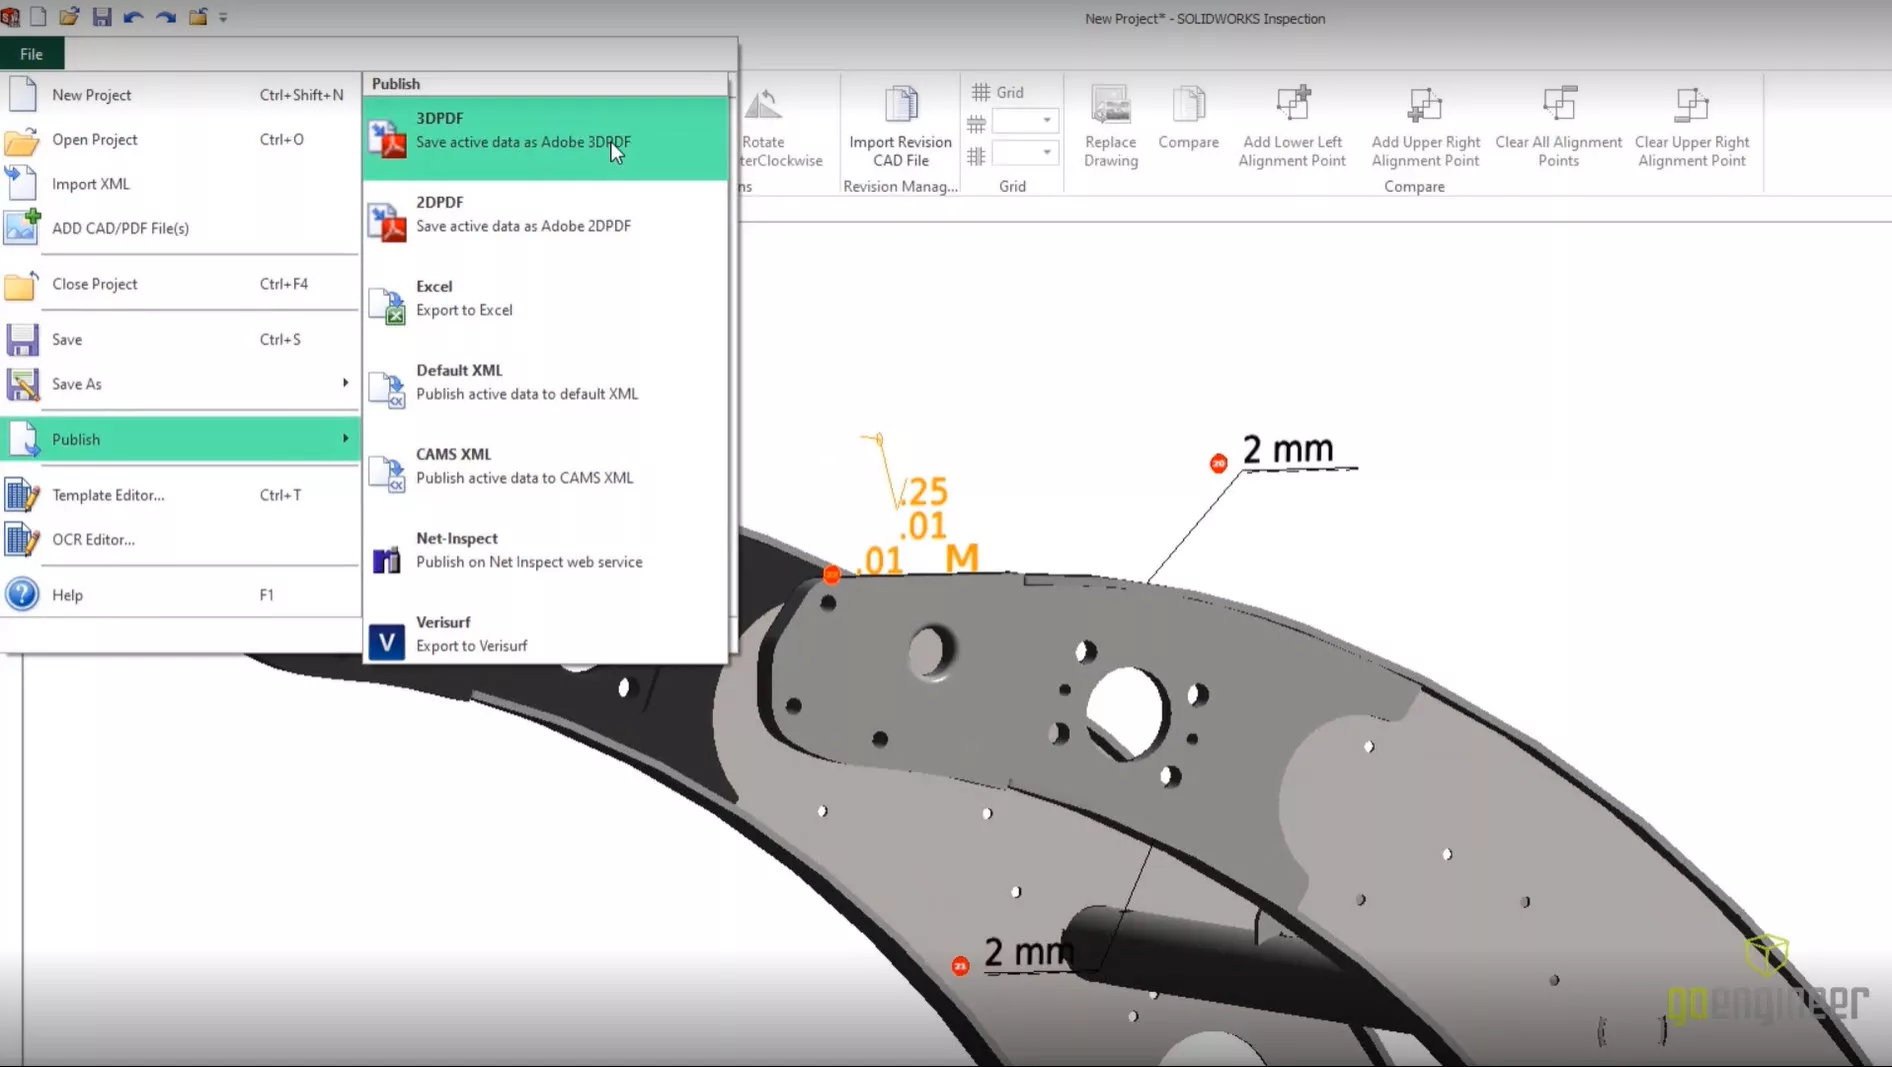 Full Inspection Report Options in SOLIDWORKS Inspection 2022